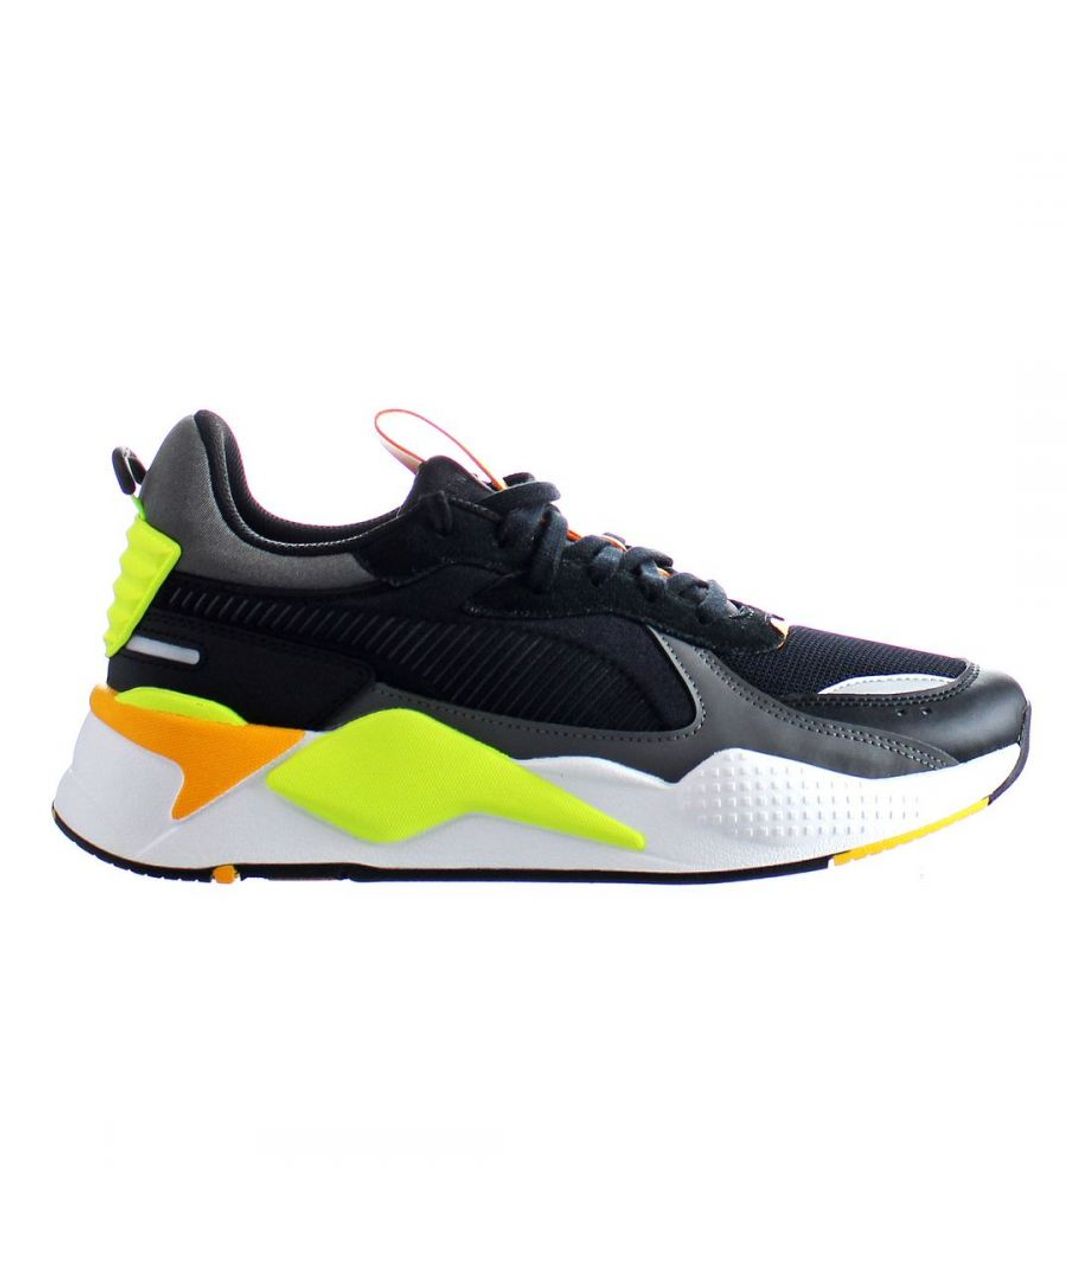 Puma RS-X Mix Black Mens Trainers - Compare prices